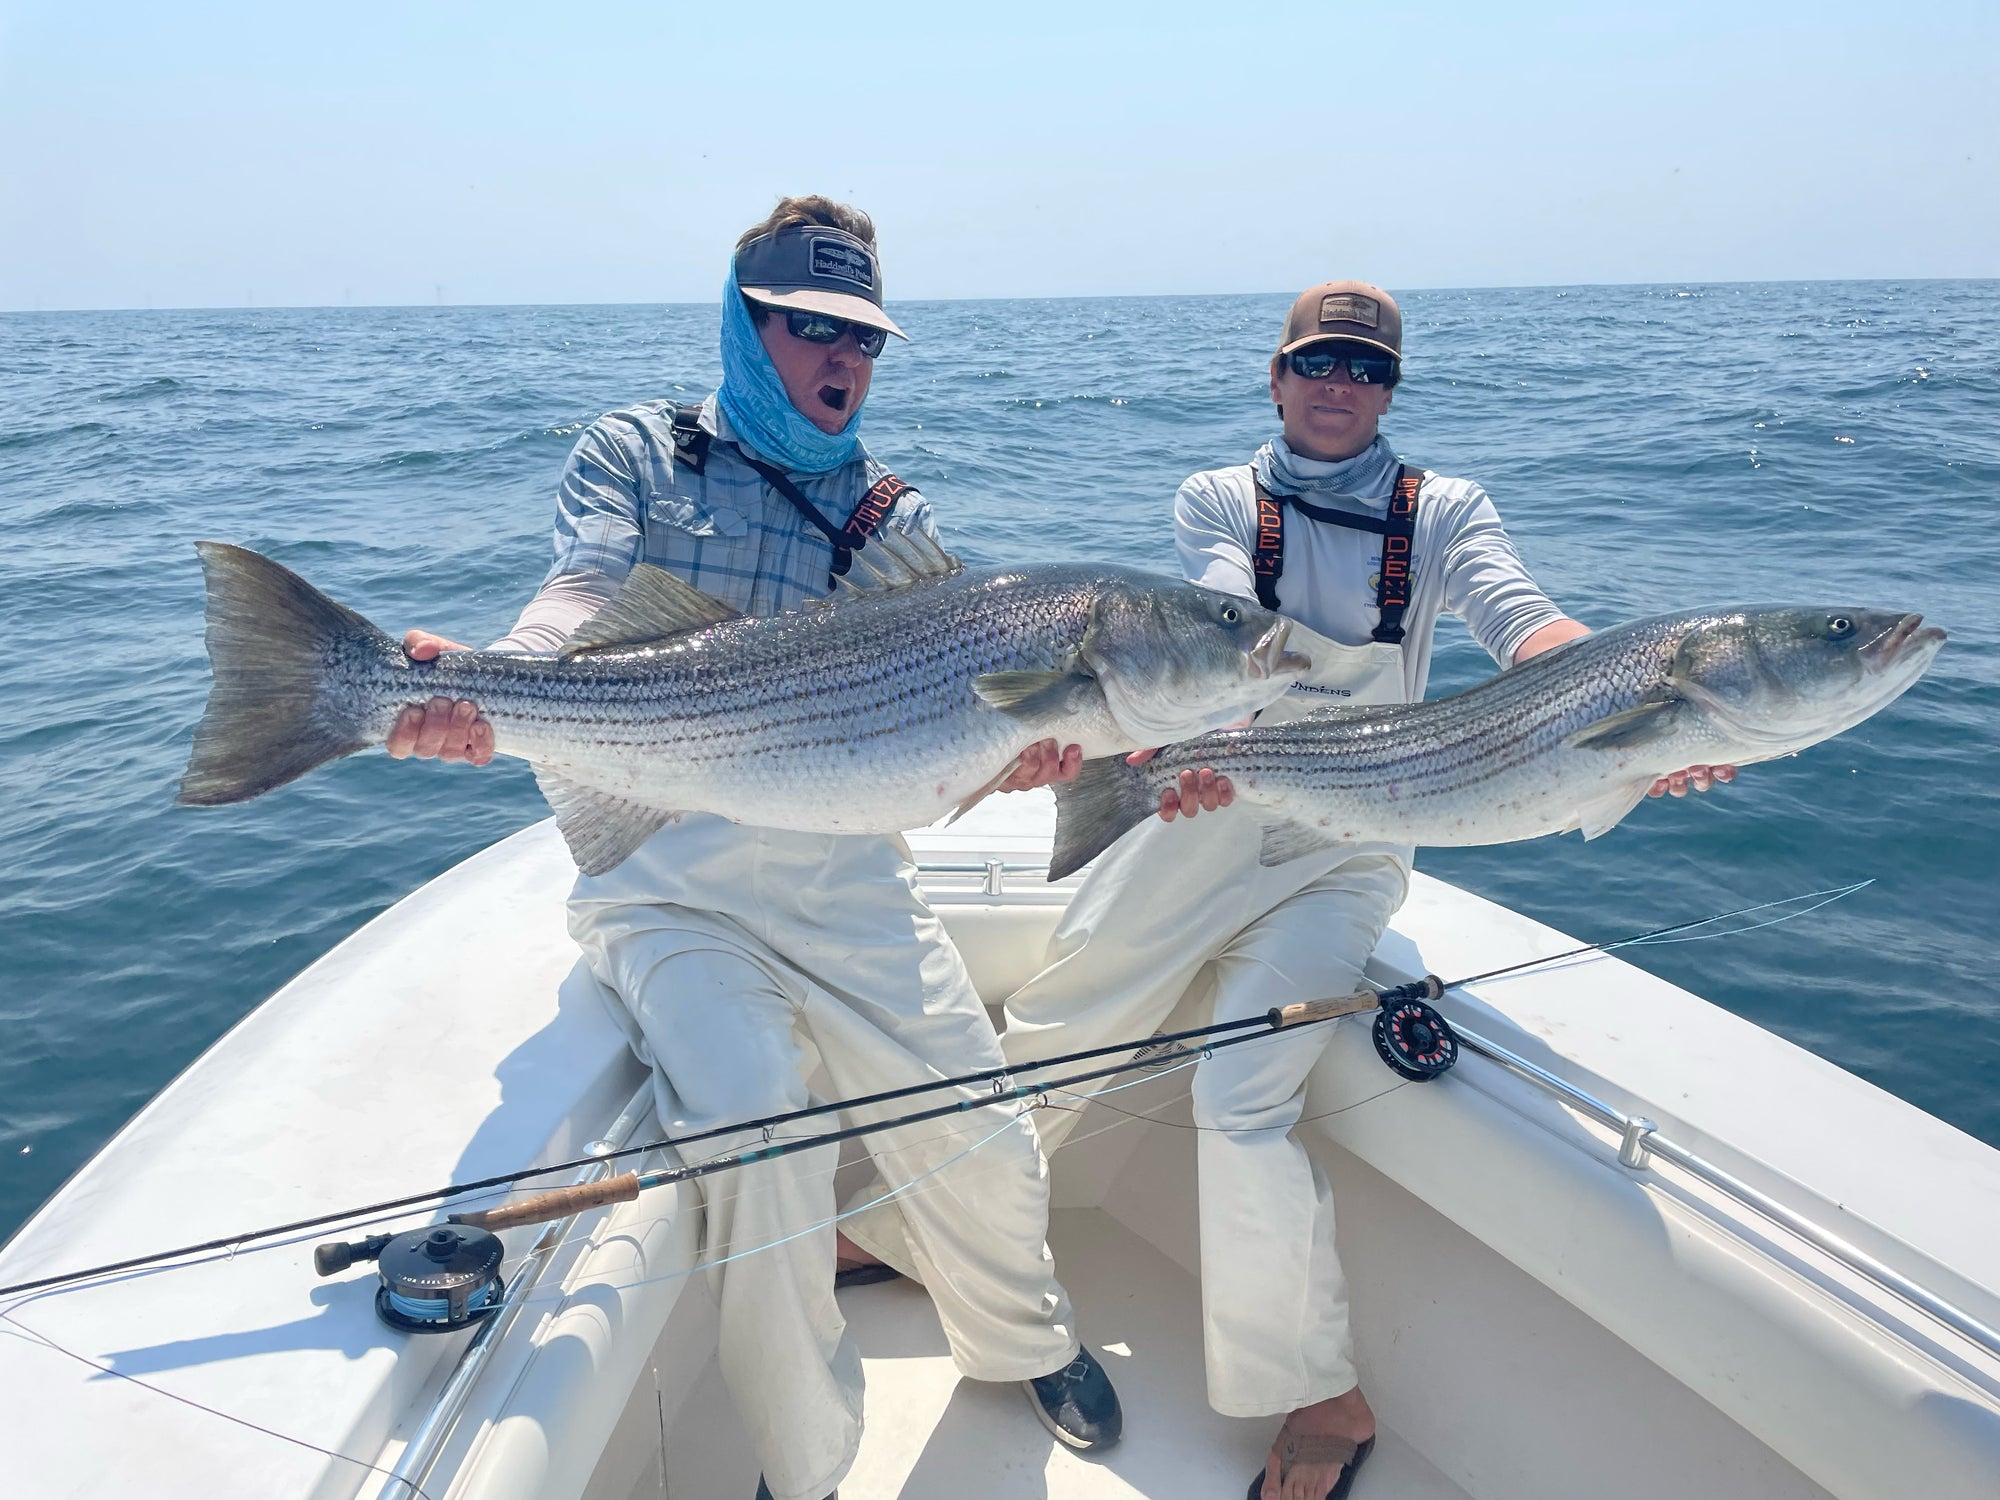 Two anglers holding up two large striped bass that they caught, they are on a boat with blue water in the background 